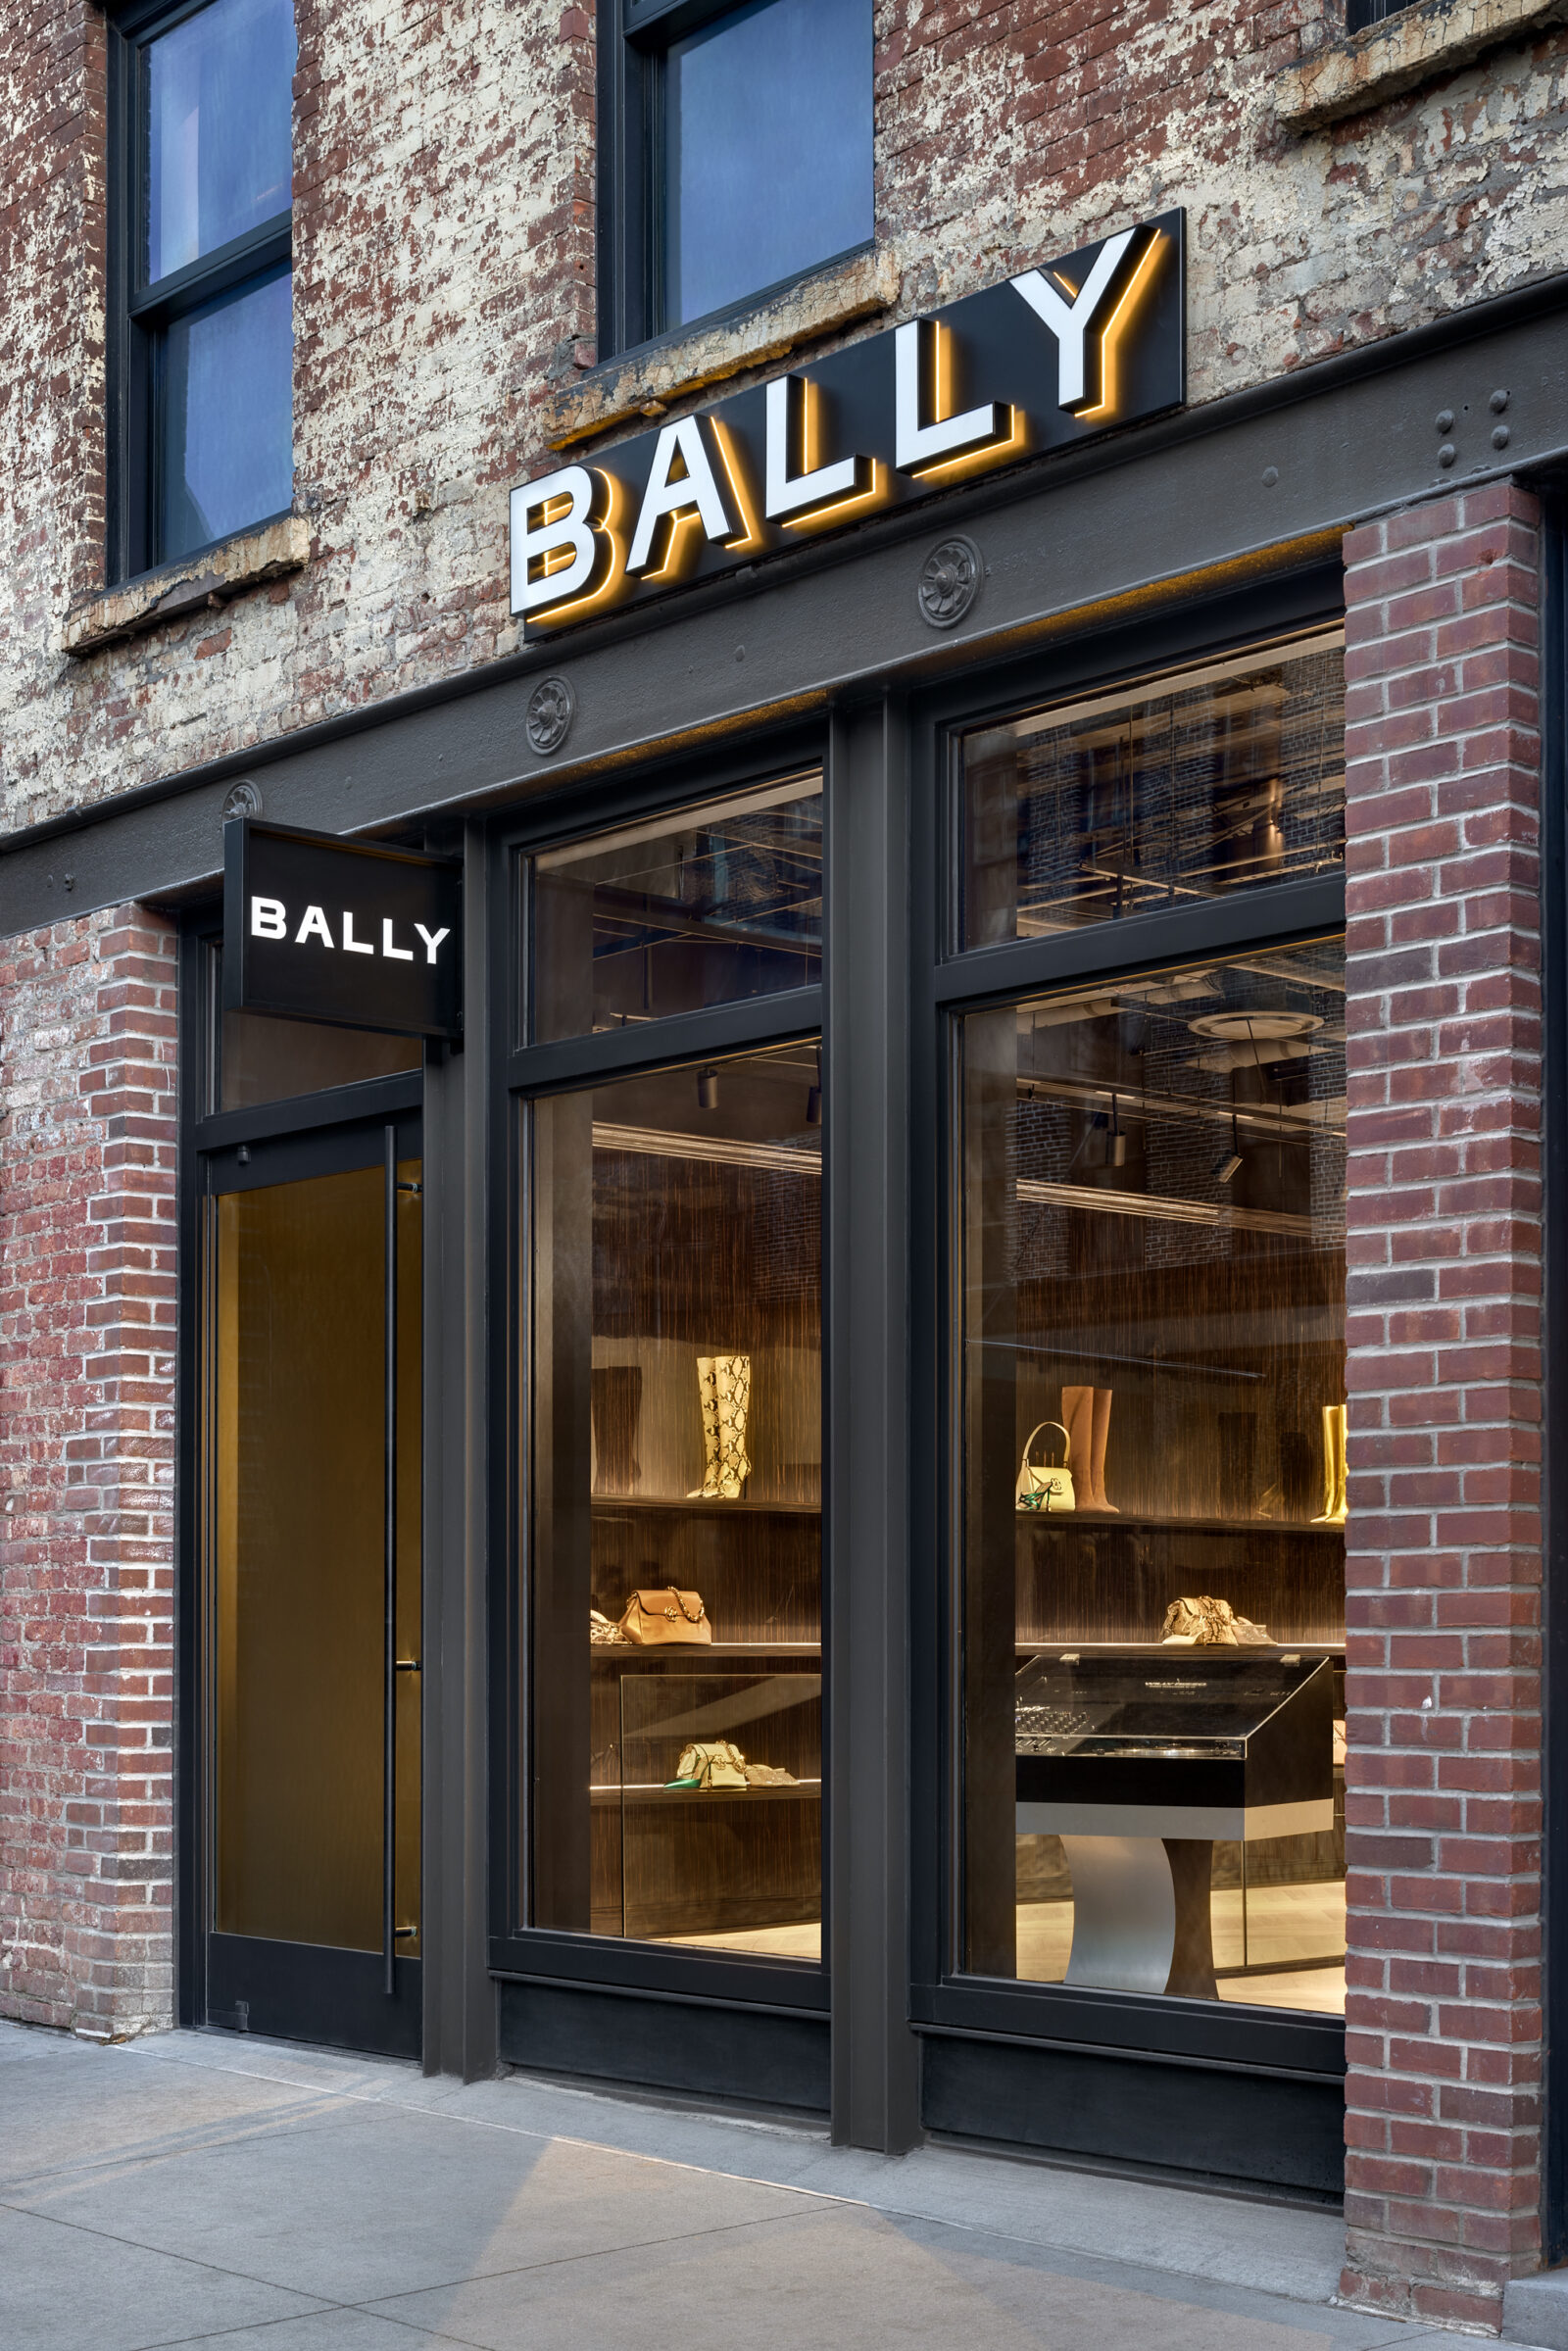 Bally, Meatpacking District